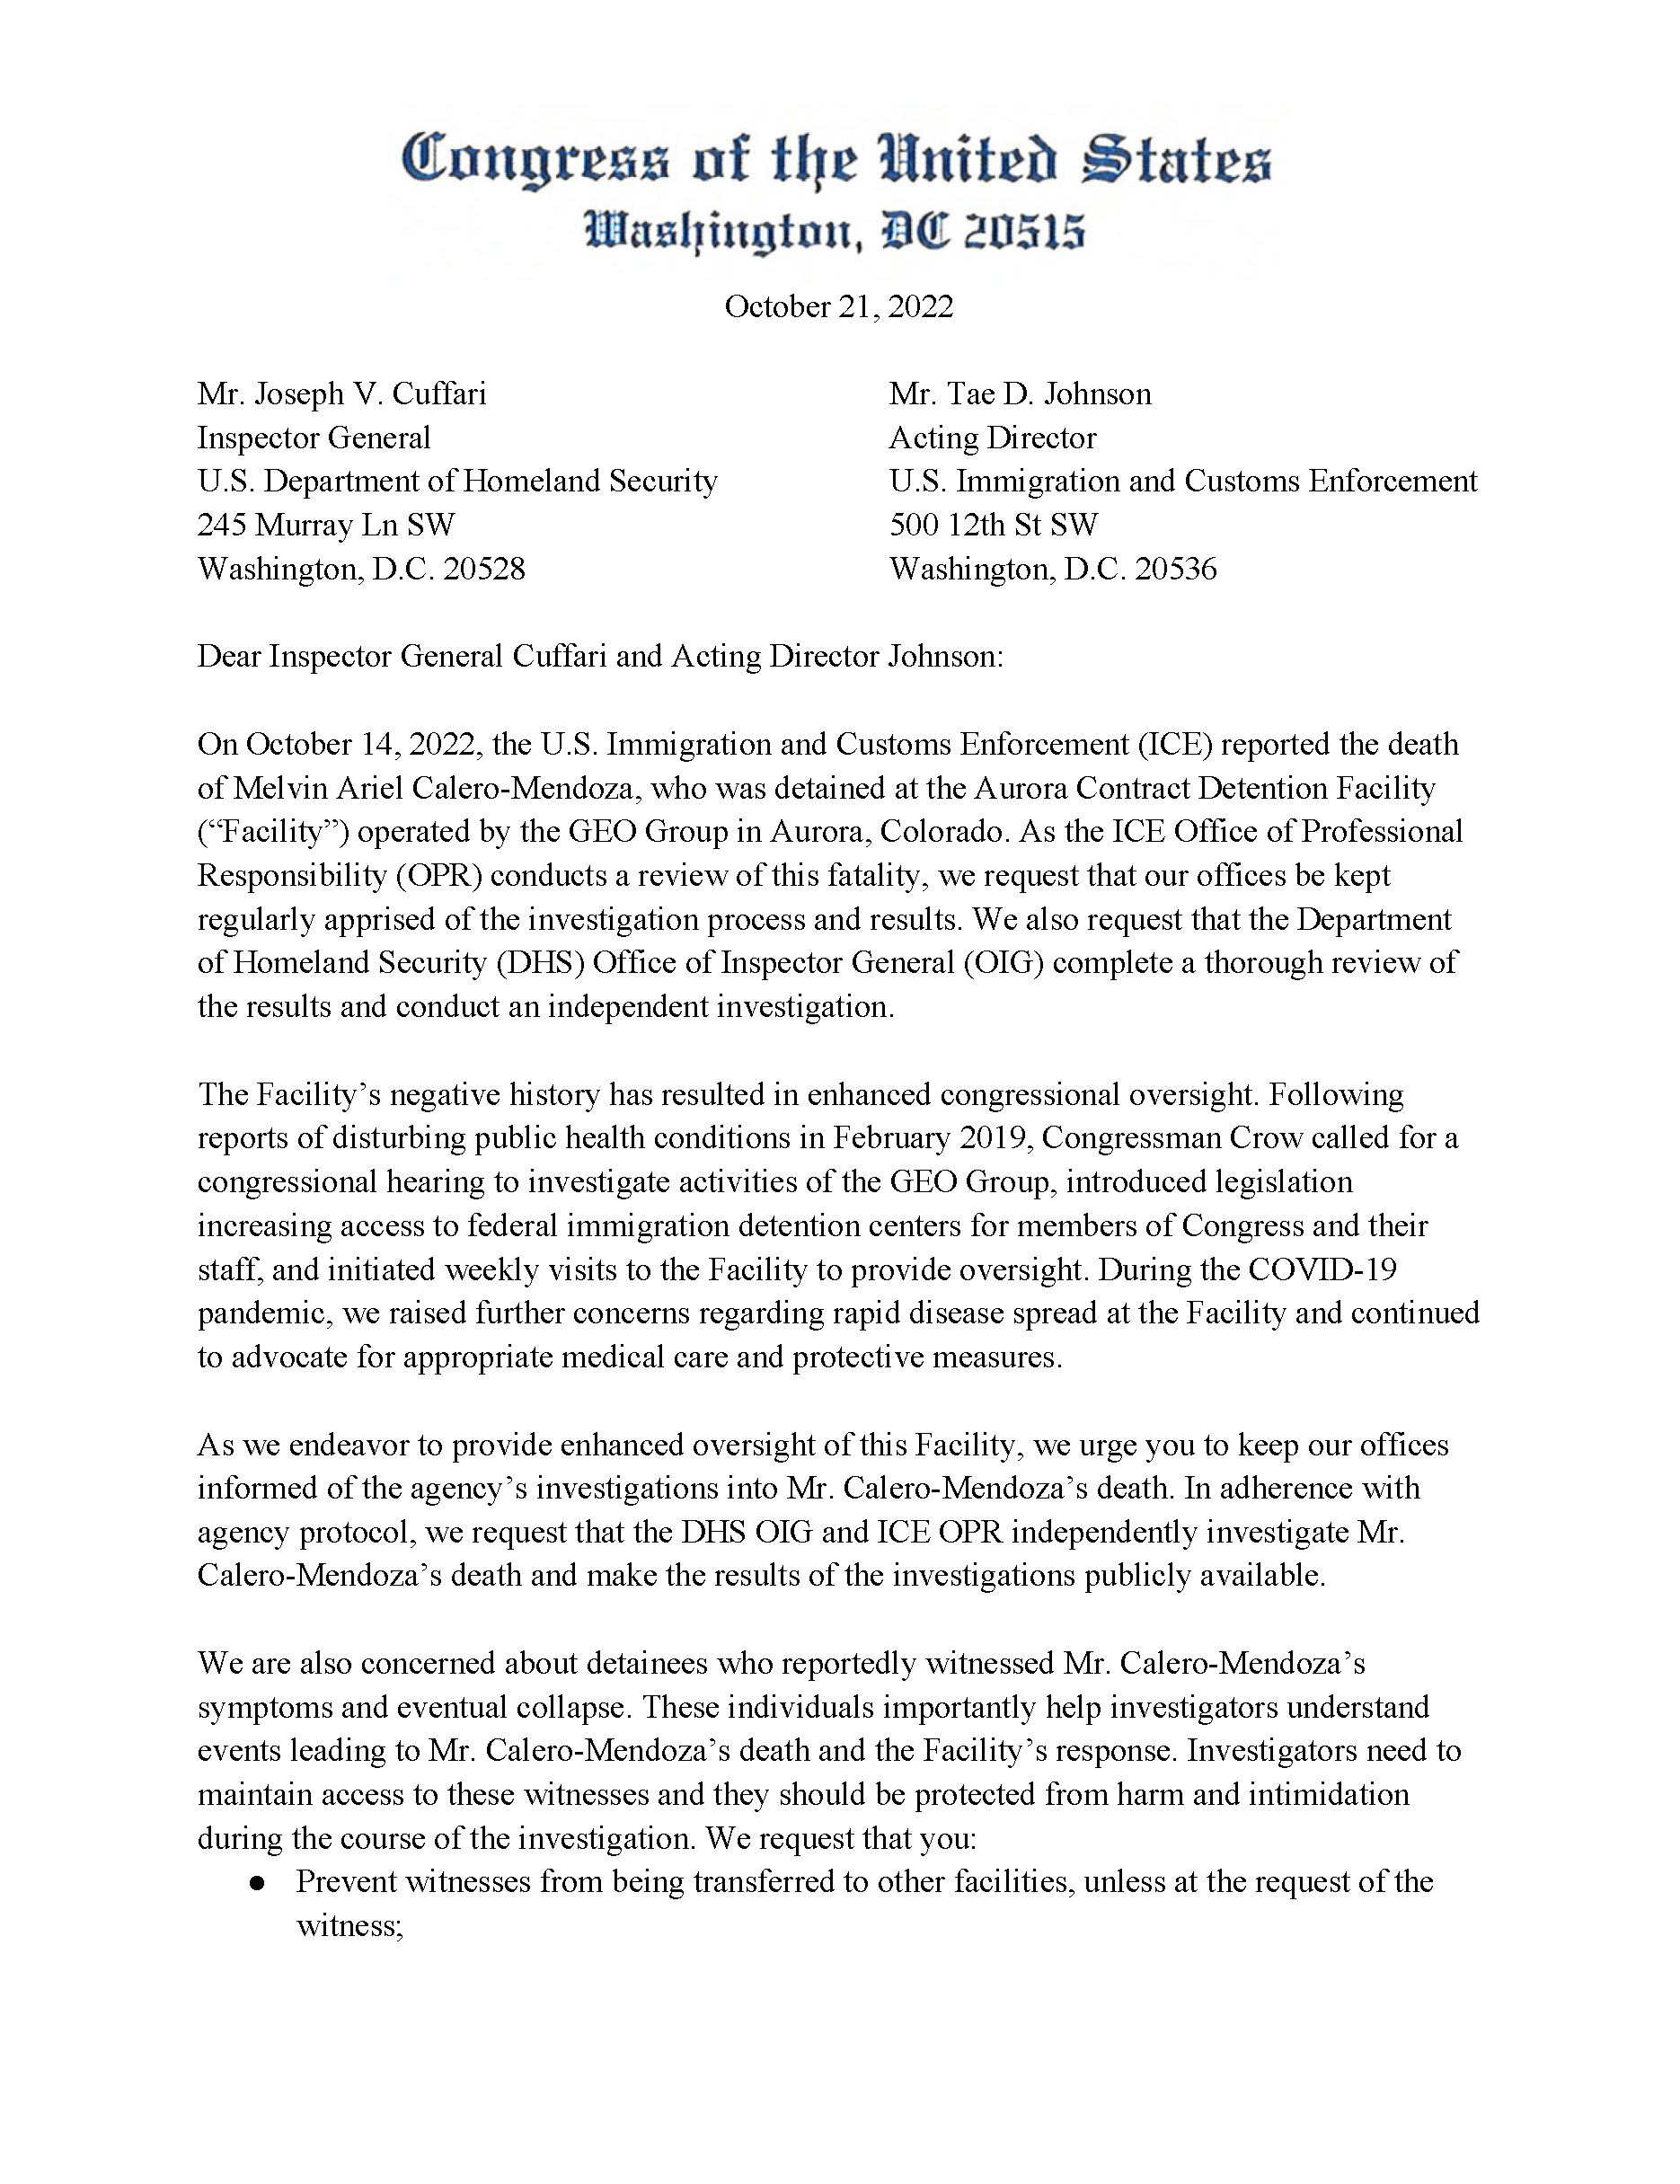 2022.10.21 FINAL ICE,DHS Letter_Page_1.png